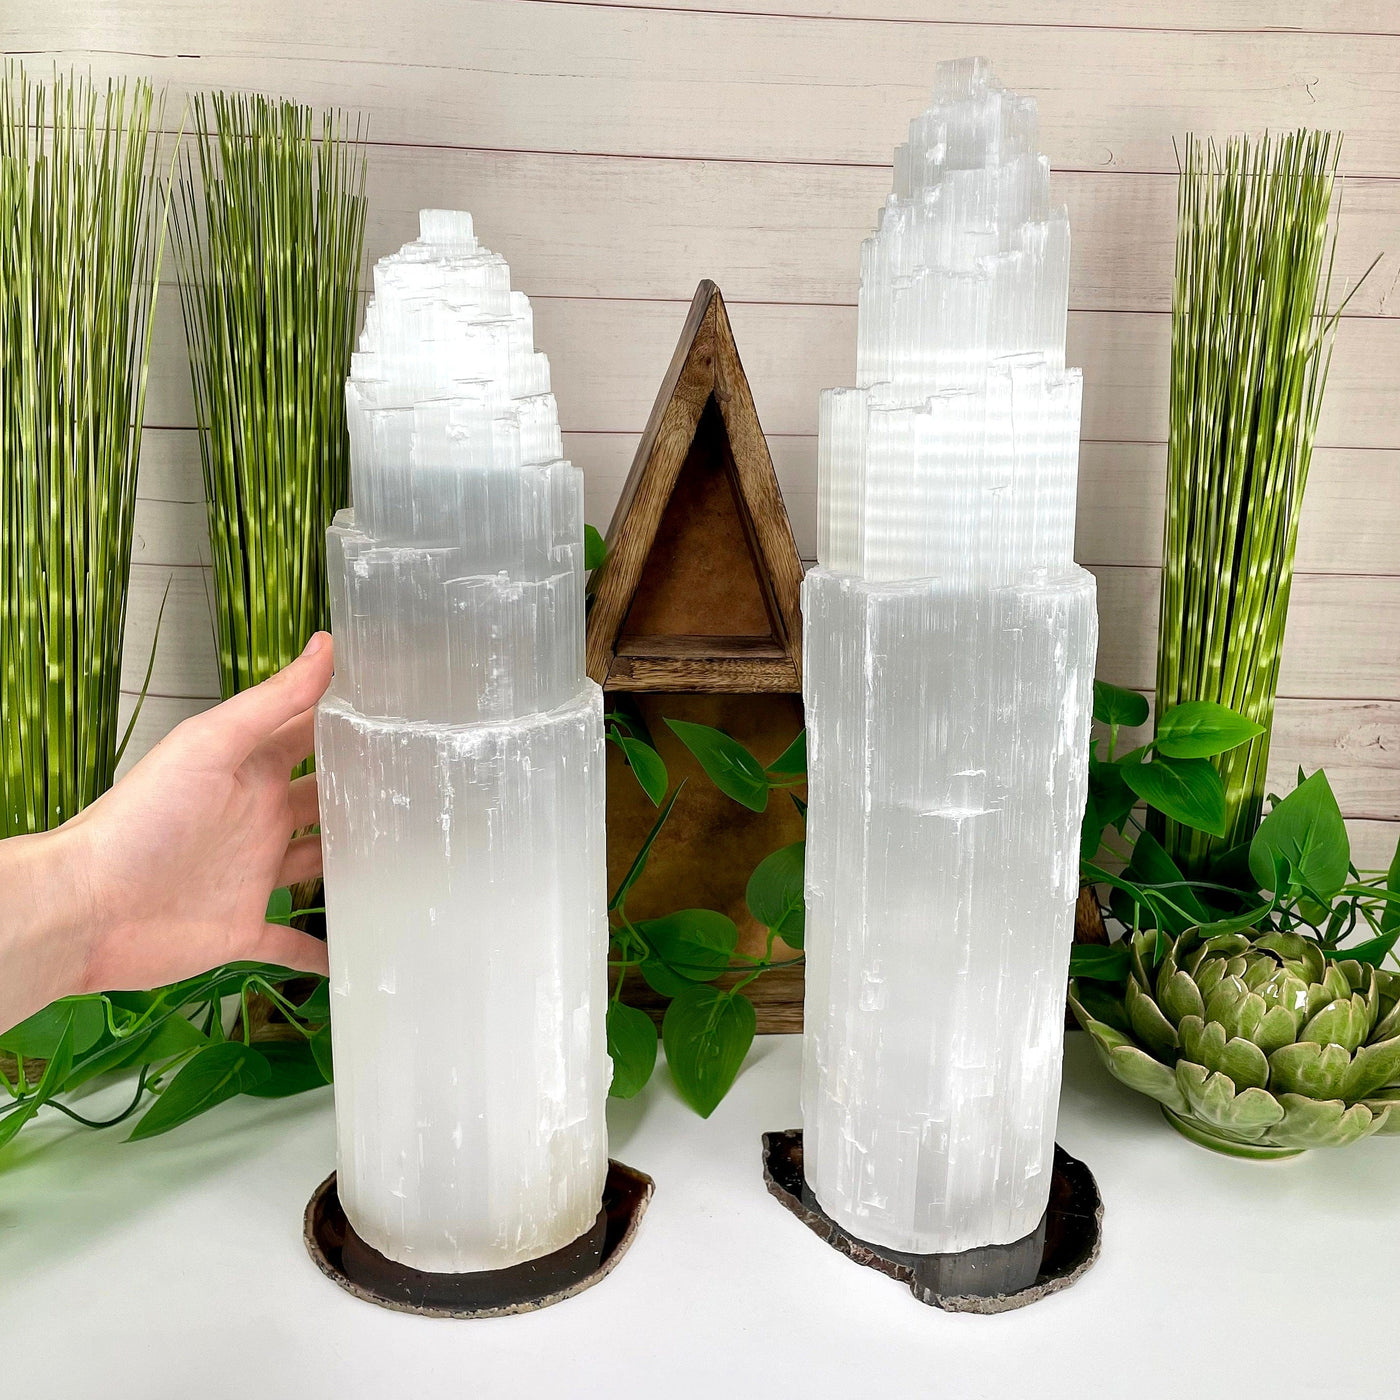 two selenite xxl lamps on display in front of backdrop for possible variations with a hand on one of them for size reference